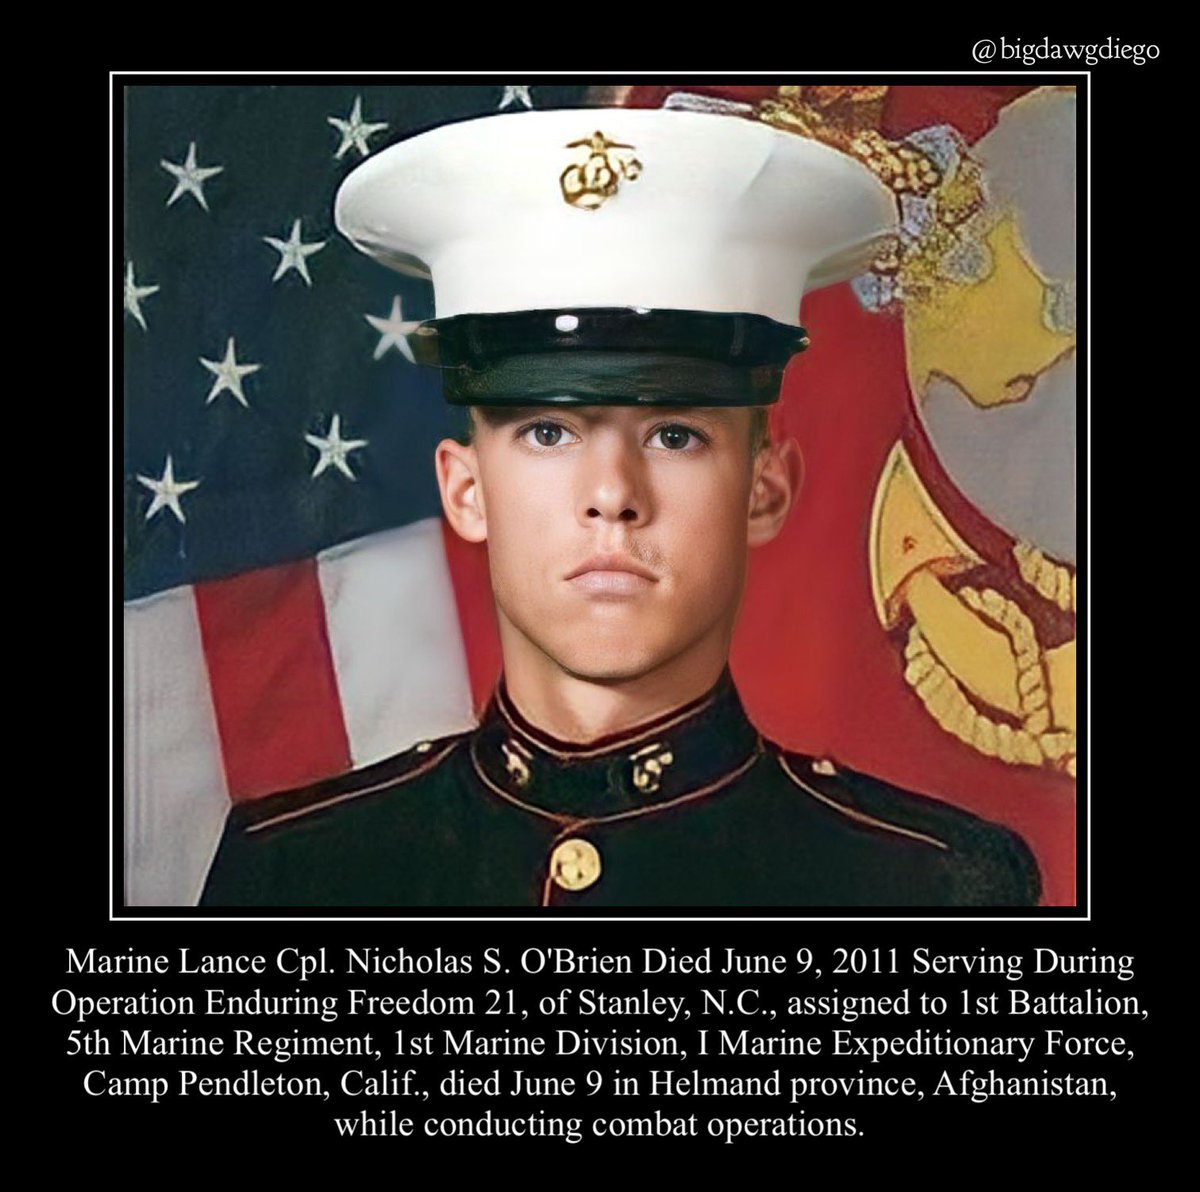 “They Say no man is truly Dead until he is Forgotten, so Today I say your name so you are not.”
#nooneleftbehind #nooneforgotten #thepriceoffreedom #rememberthefallen #usmc #1stbattalion5thmarines #1stmarinedivision